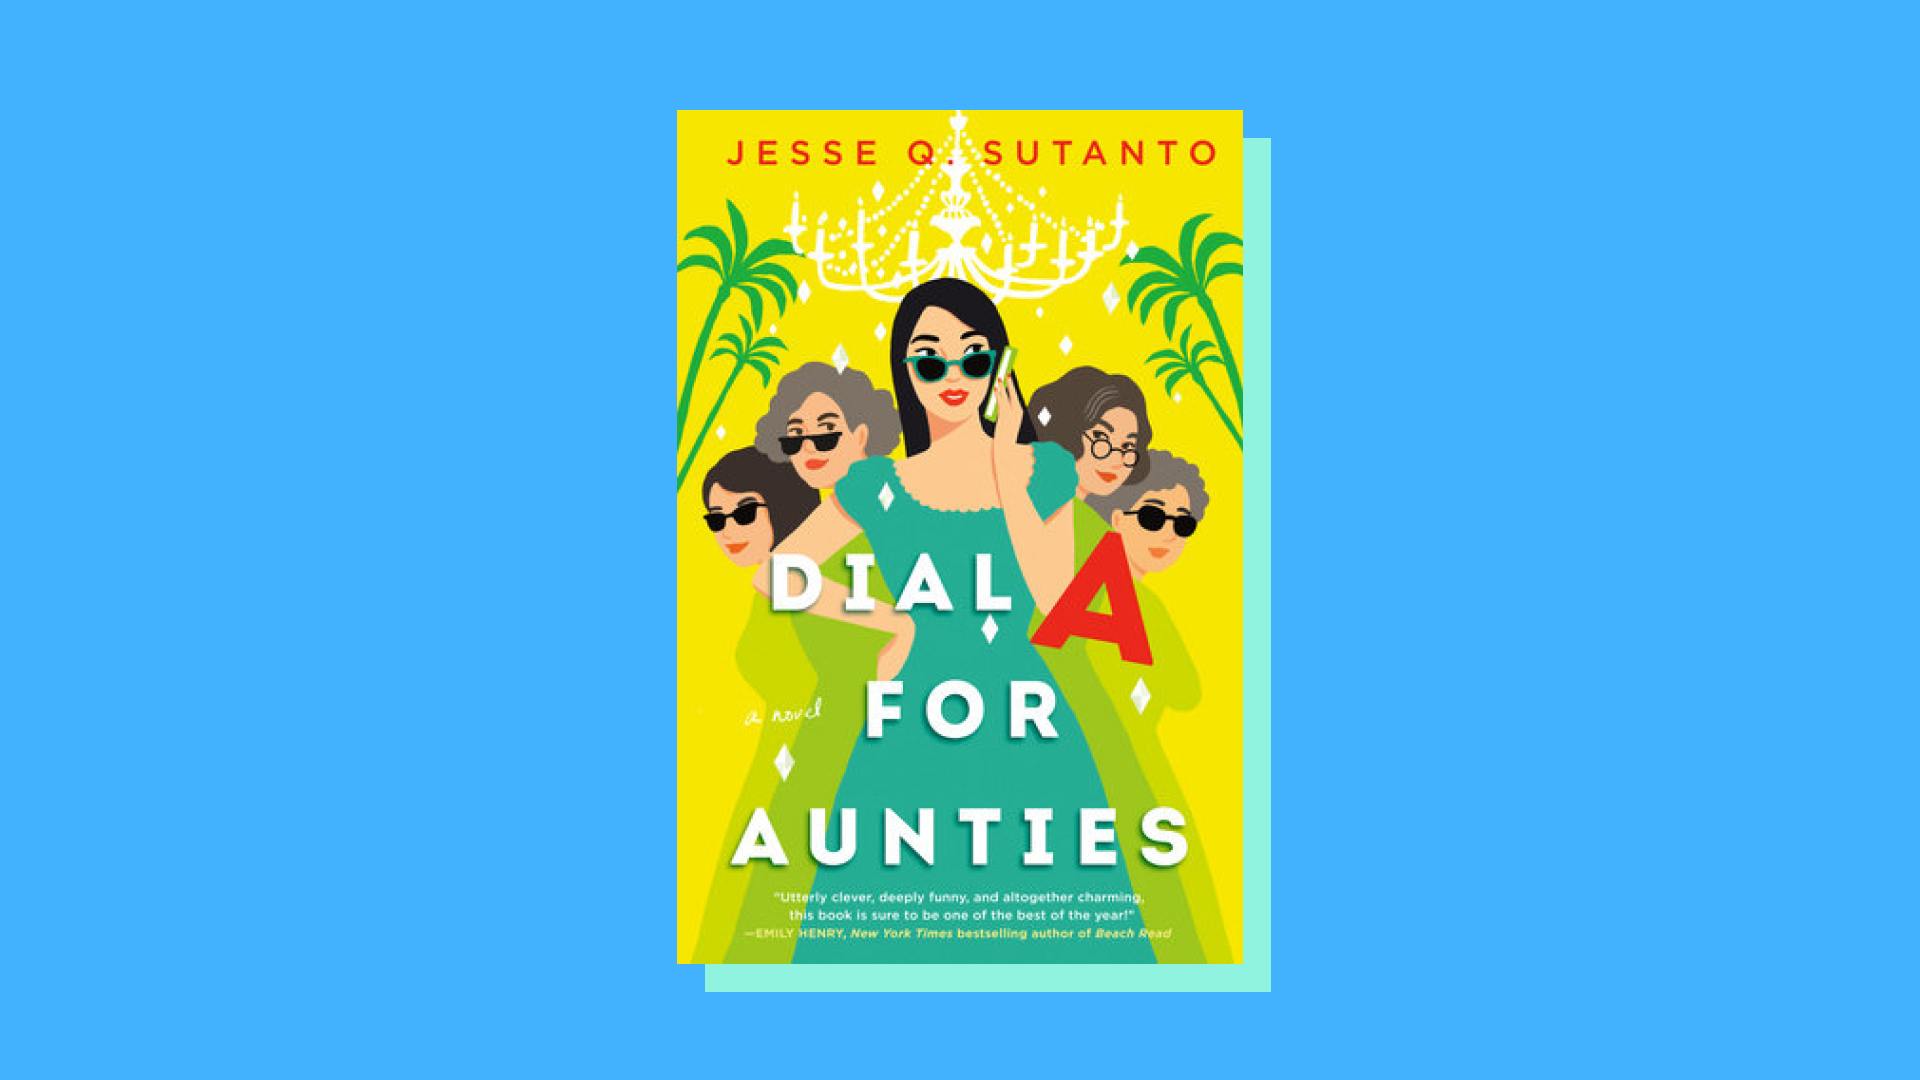 “Dial A for Aunties” by Jesse Q. Sutanto 